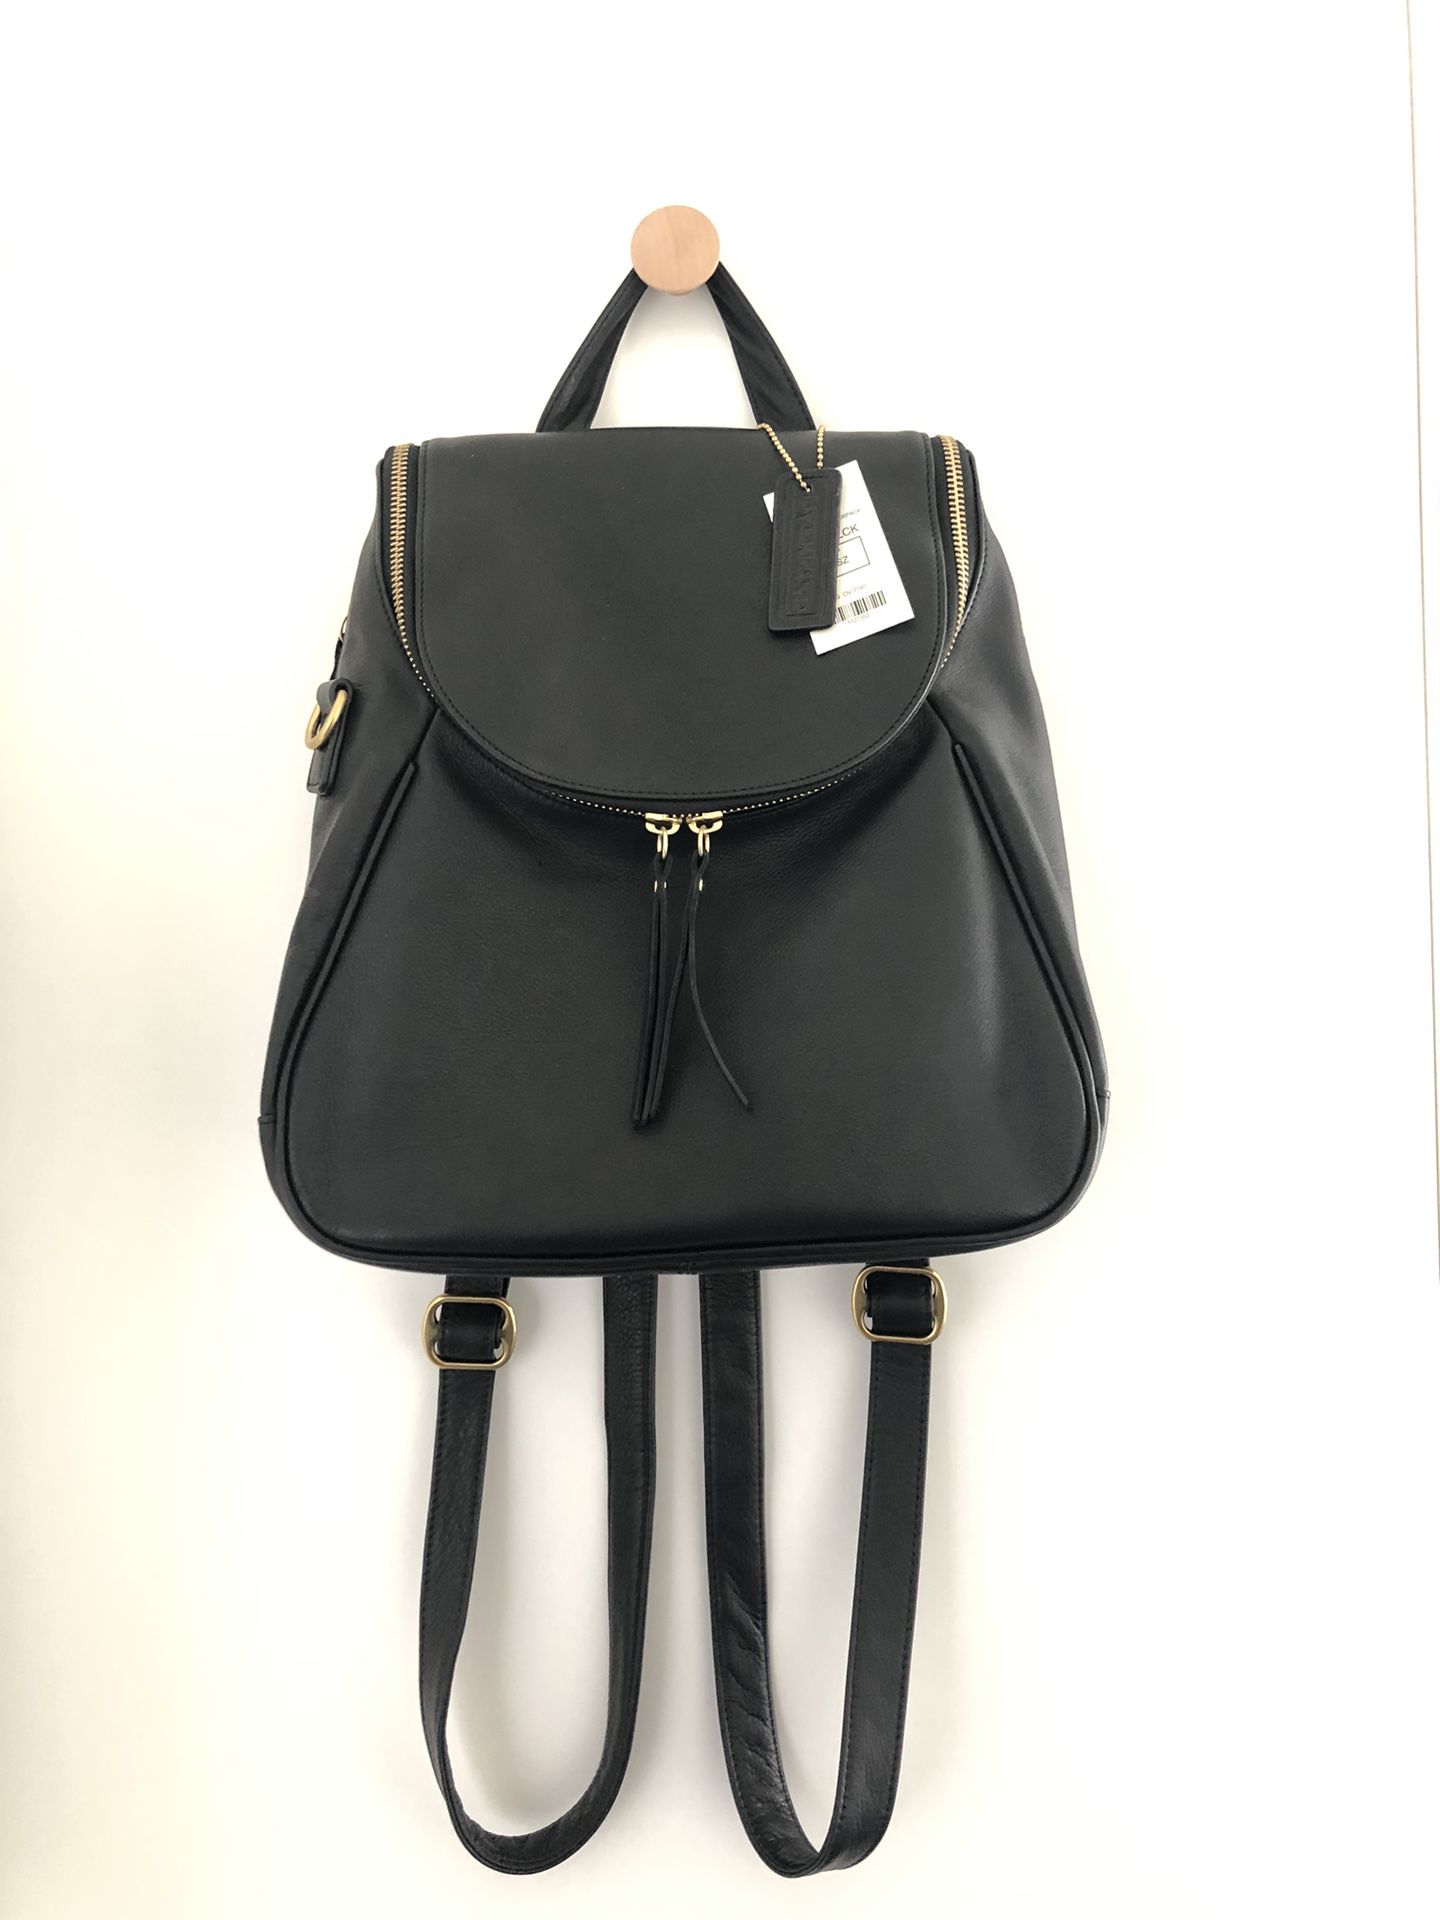 BNWT Florence Small Leather Backpack Purse